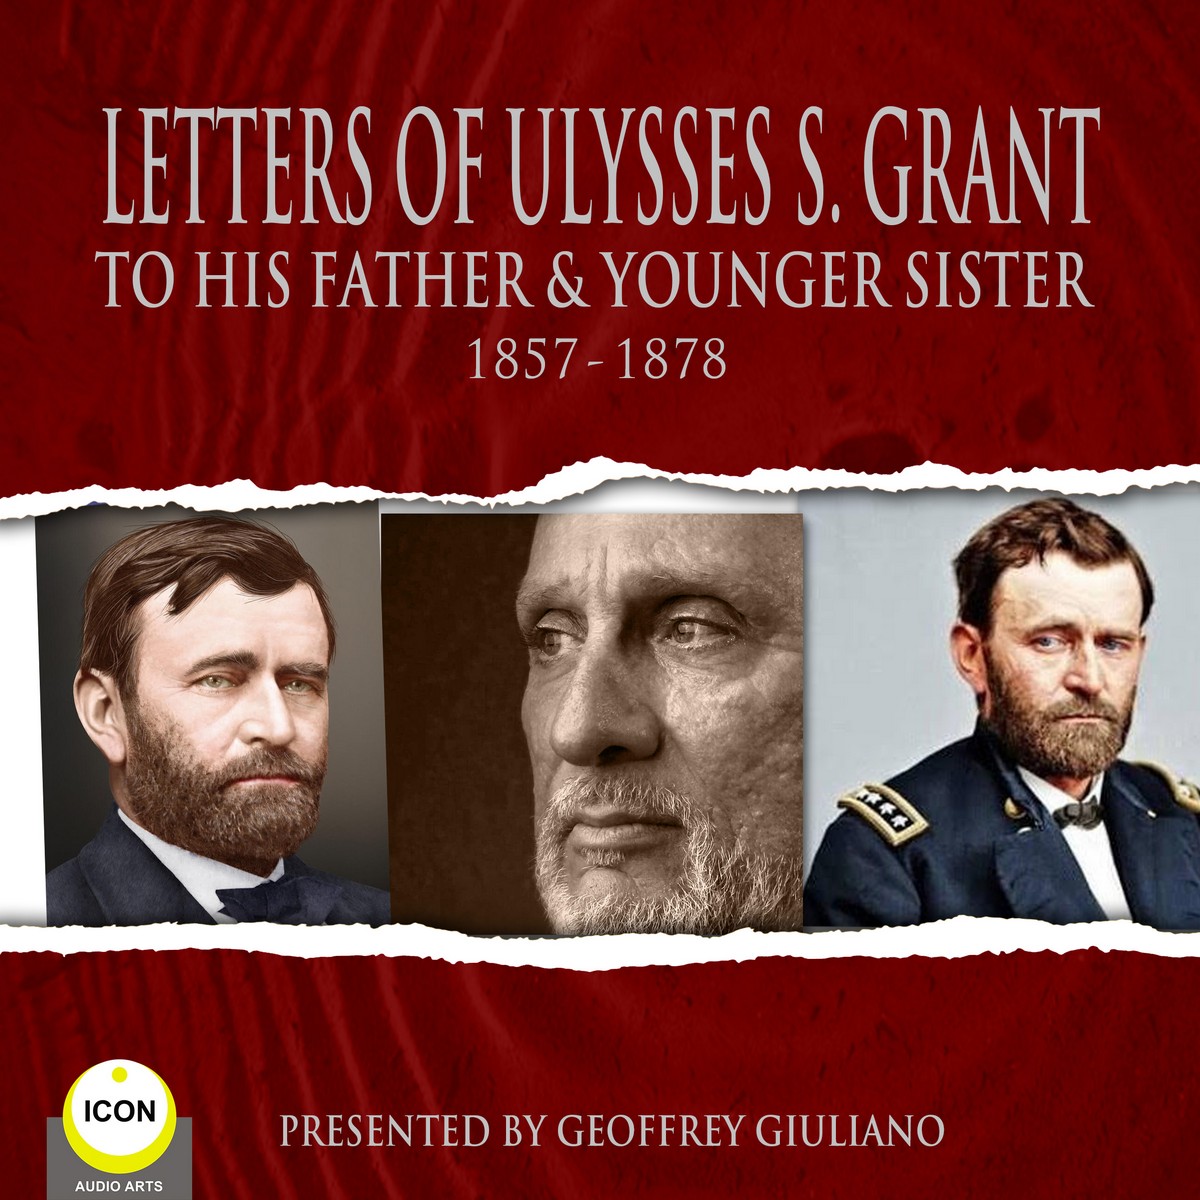 Letter Of Ulysses S. Grant To His Father & Younger Sister 1857-1878